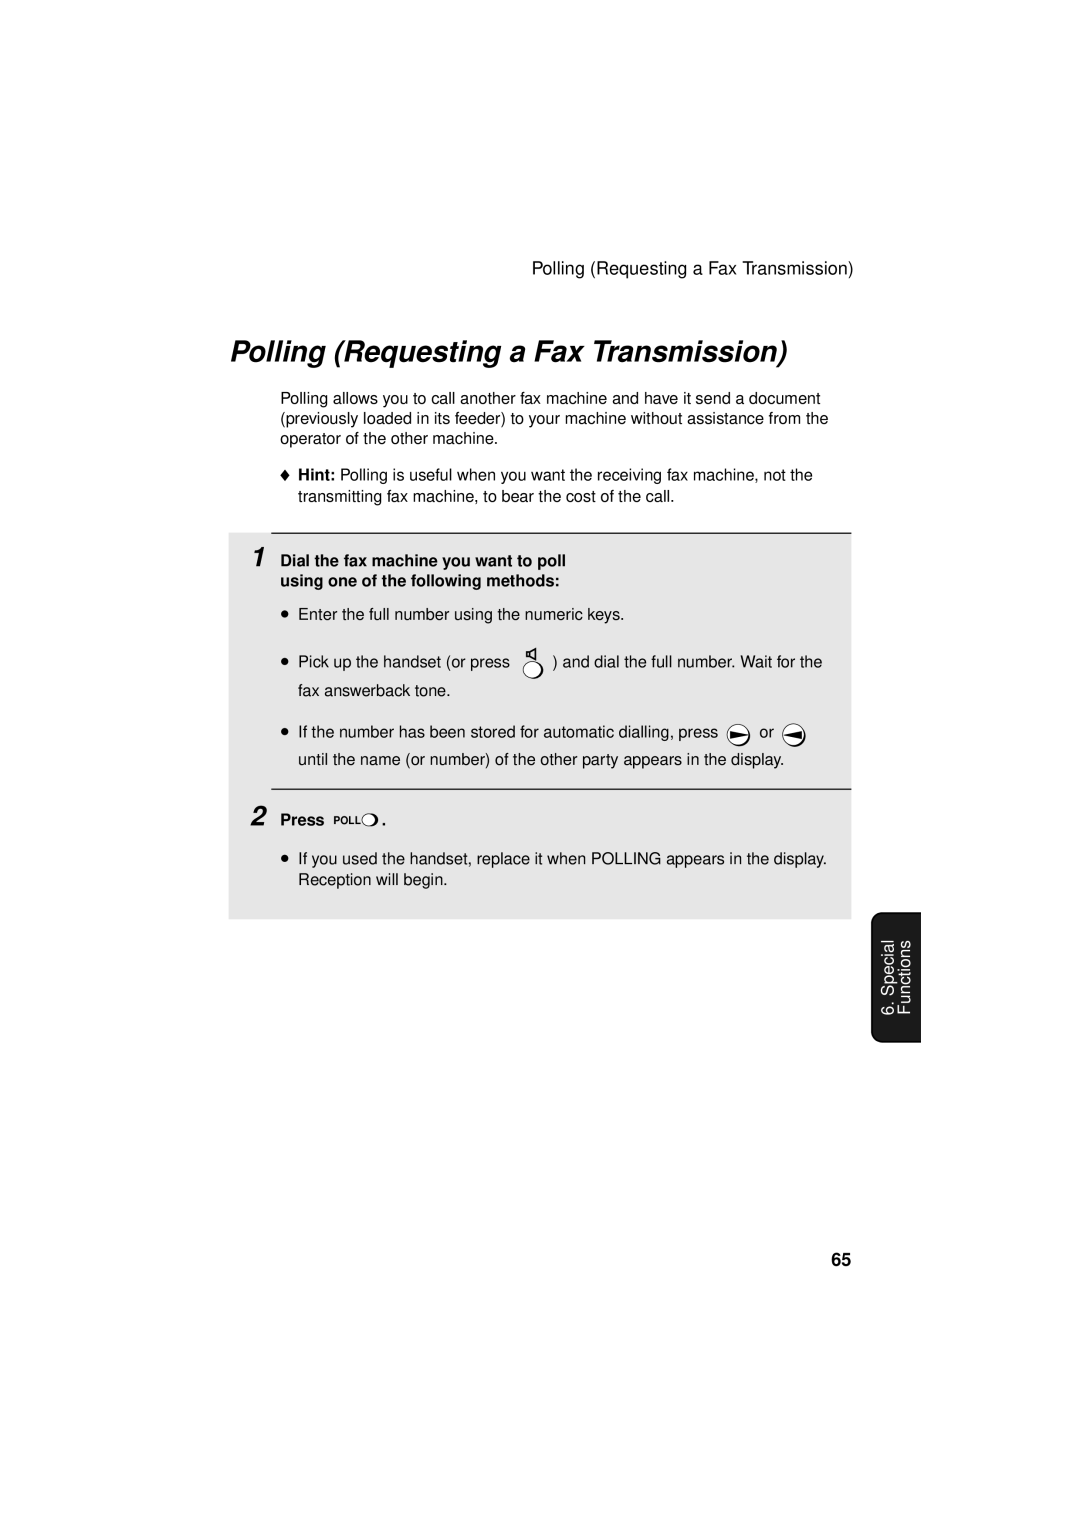 Sharp FO-P610/FO-P630 operation manual Polling Requesting a Fax Transmission, Press Poll 